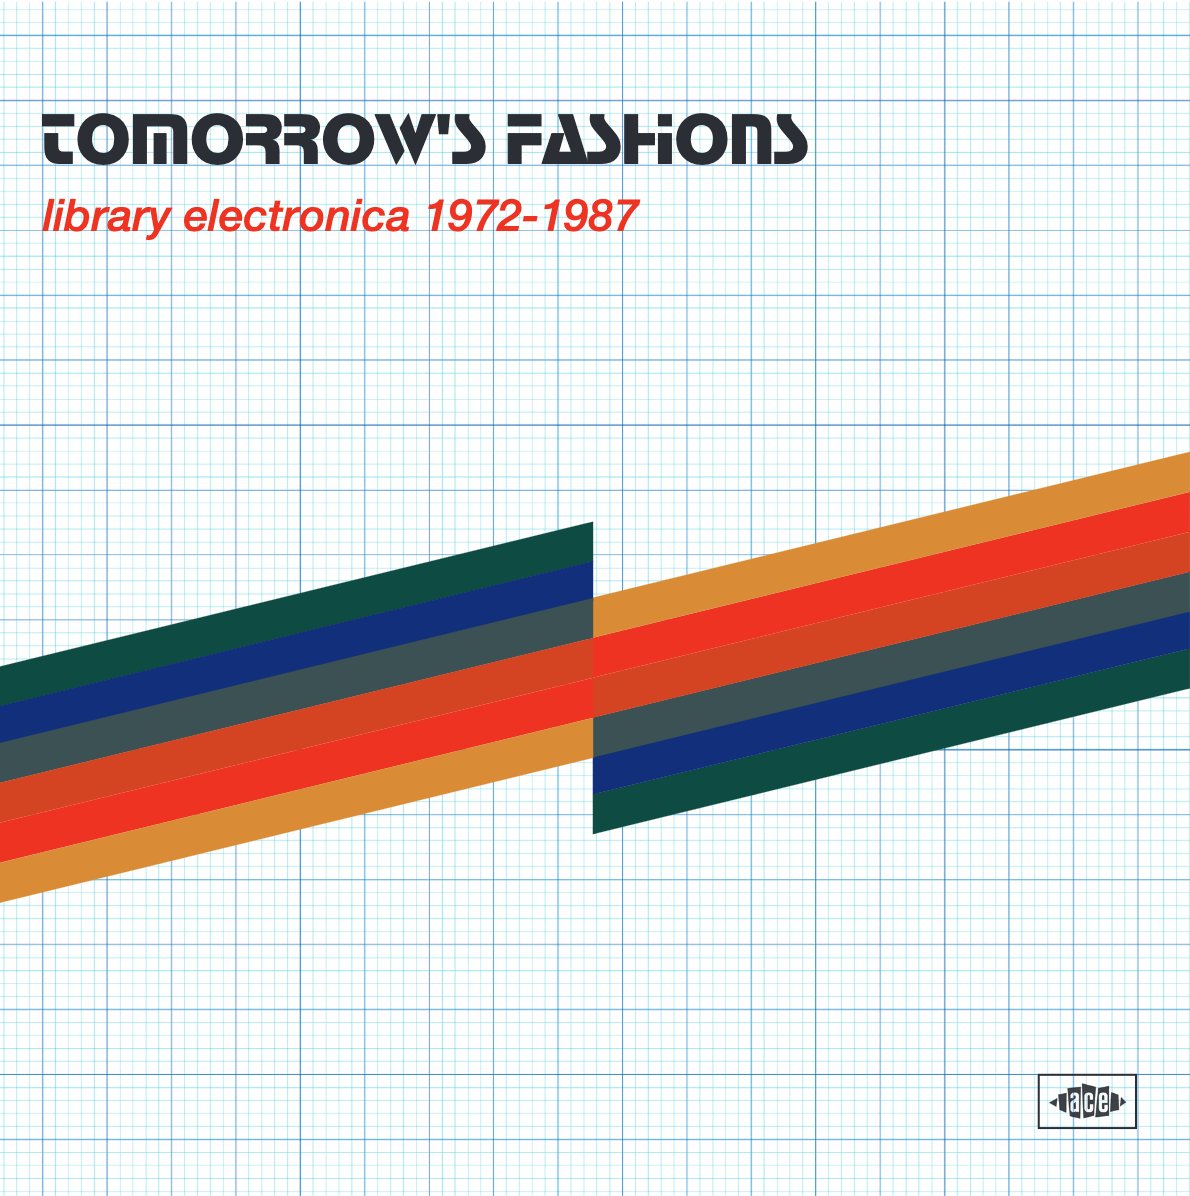 Library electronica! I'm thrilled this is coming out next month. Ranges from potential game show themes to pure ambient. The sleevenotes were a lot of fun to research too. Pre-order here: acerecords.co.uk/tomorrows-fash…